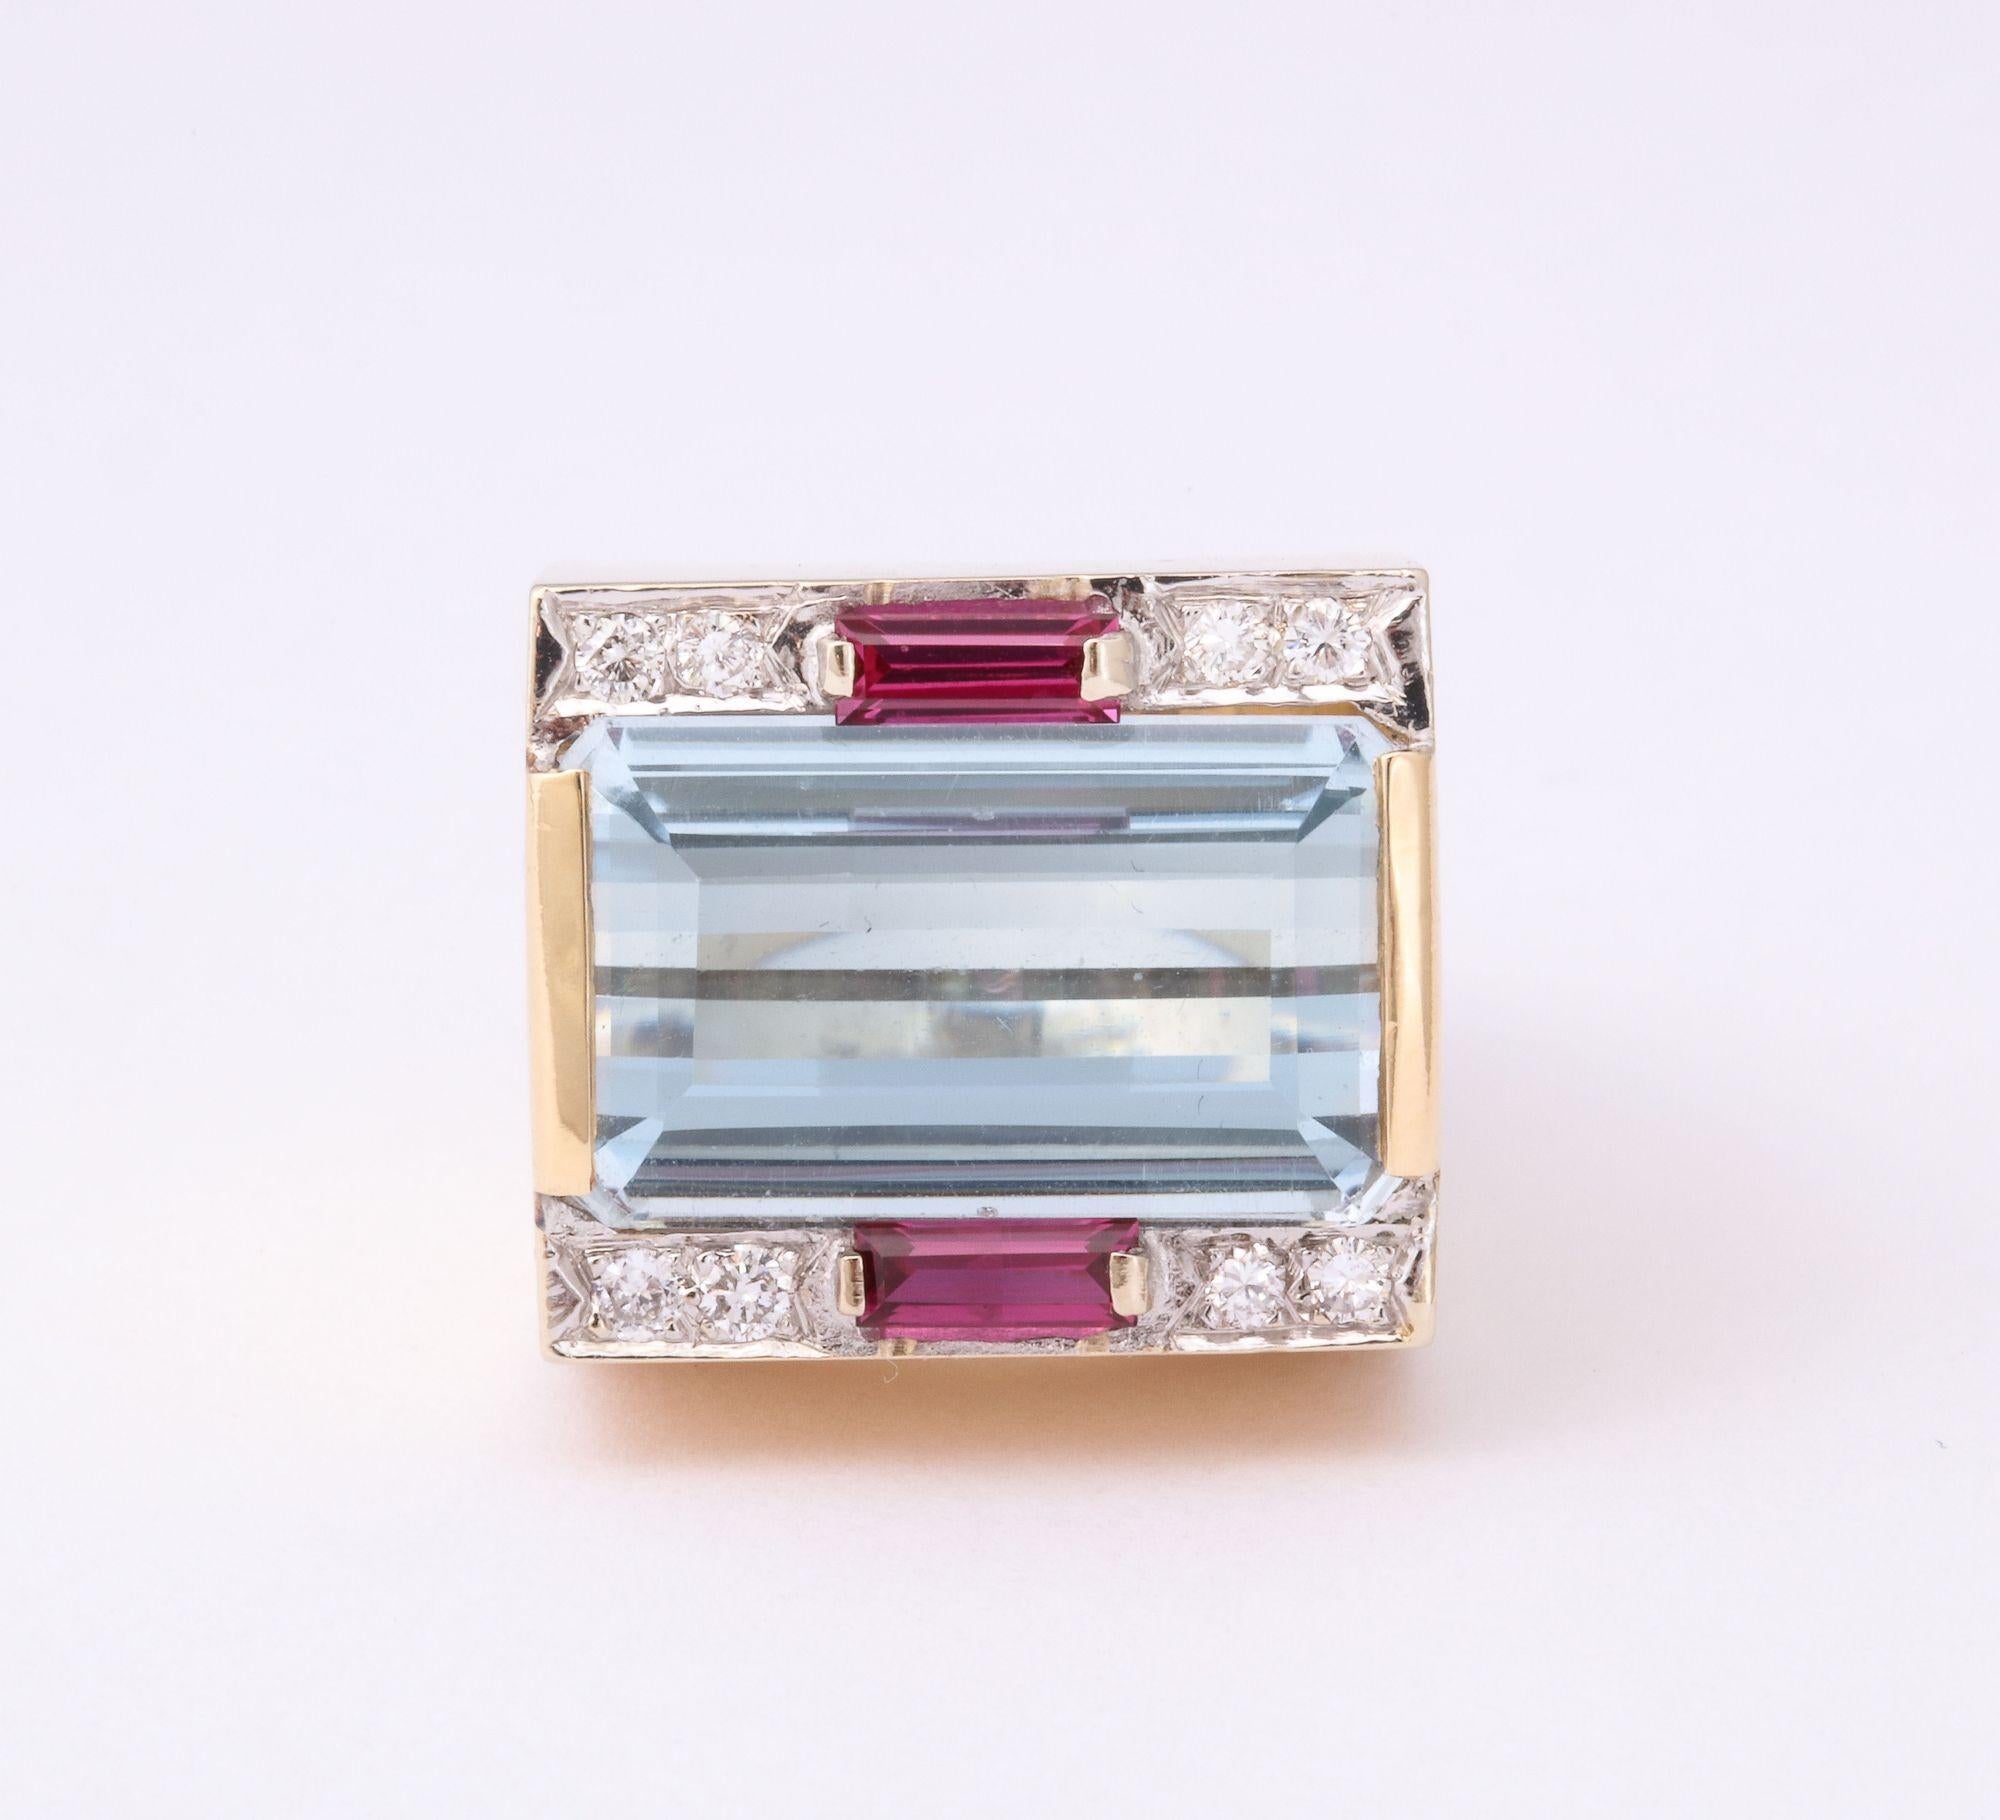 A stunning Retro ring with diamonds and spinels surround (easily removed) set in 18k gold.
 